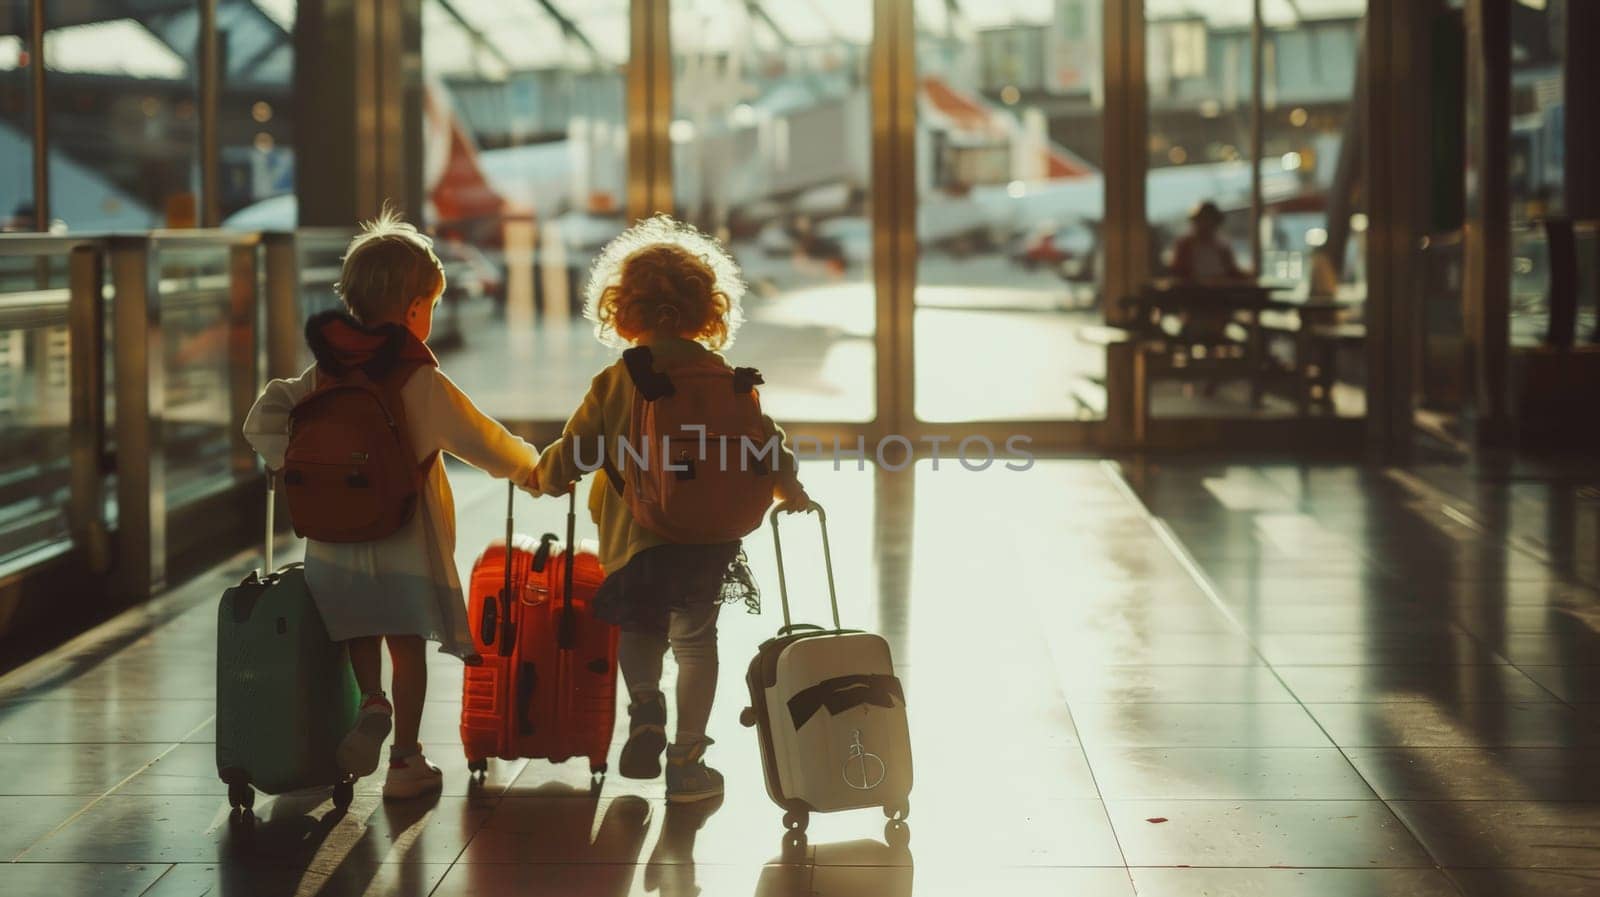 Family and kids at airport, travel Concept, family vacation.